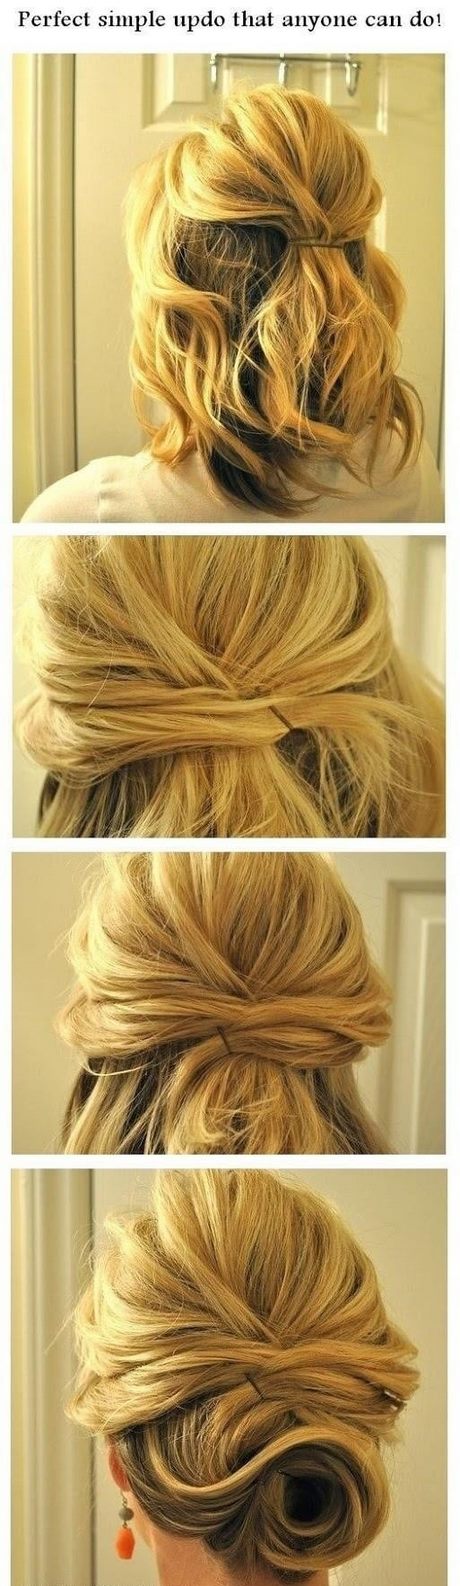 Updo hairstyles for mid length hair updo-hairstyles-for-mid-length-hair-37_13